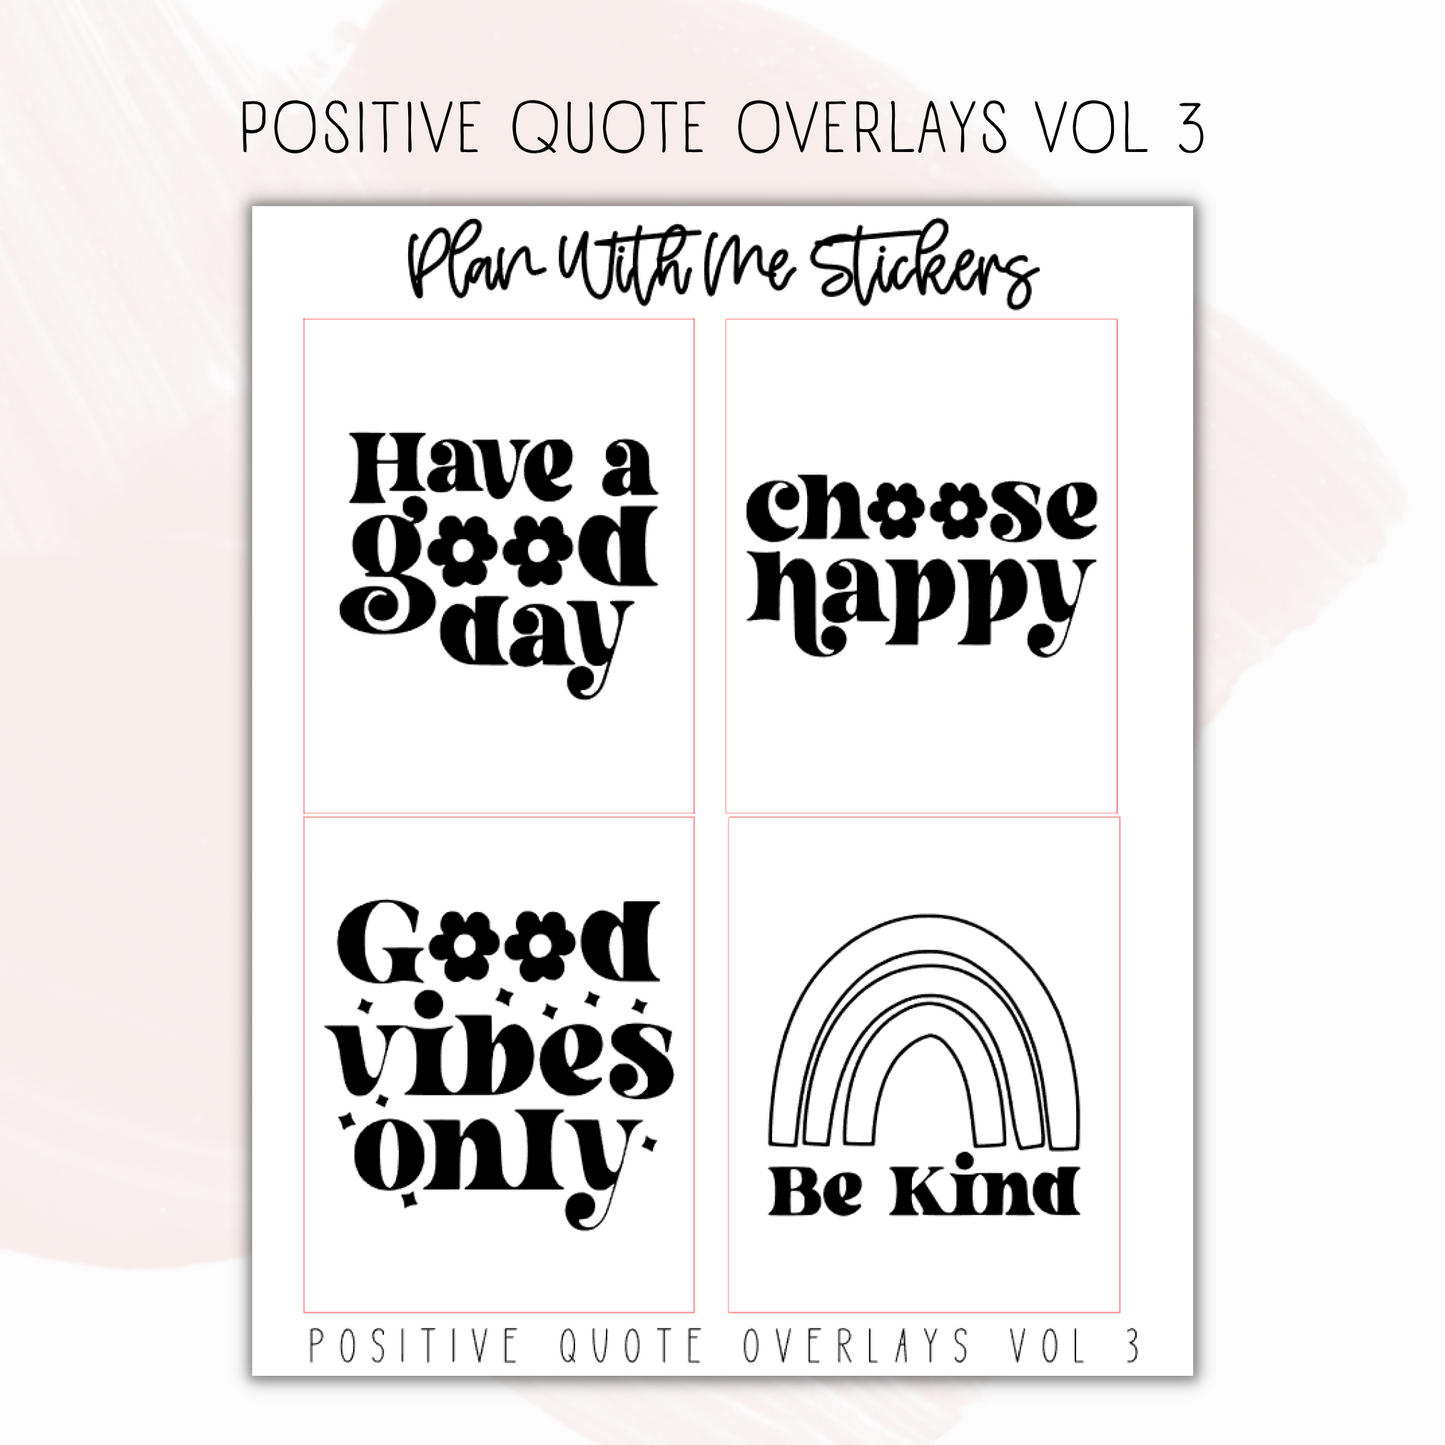 Positive Quote Overlays Vol 3